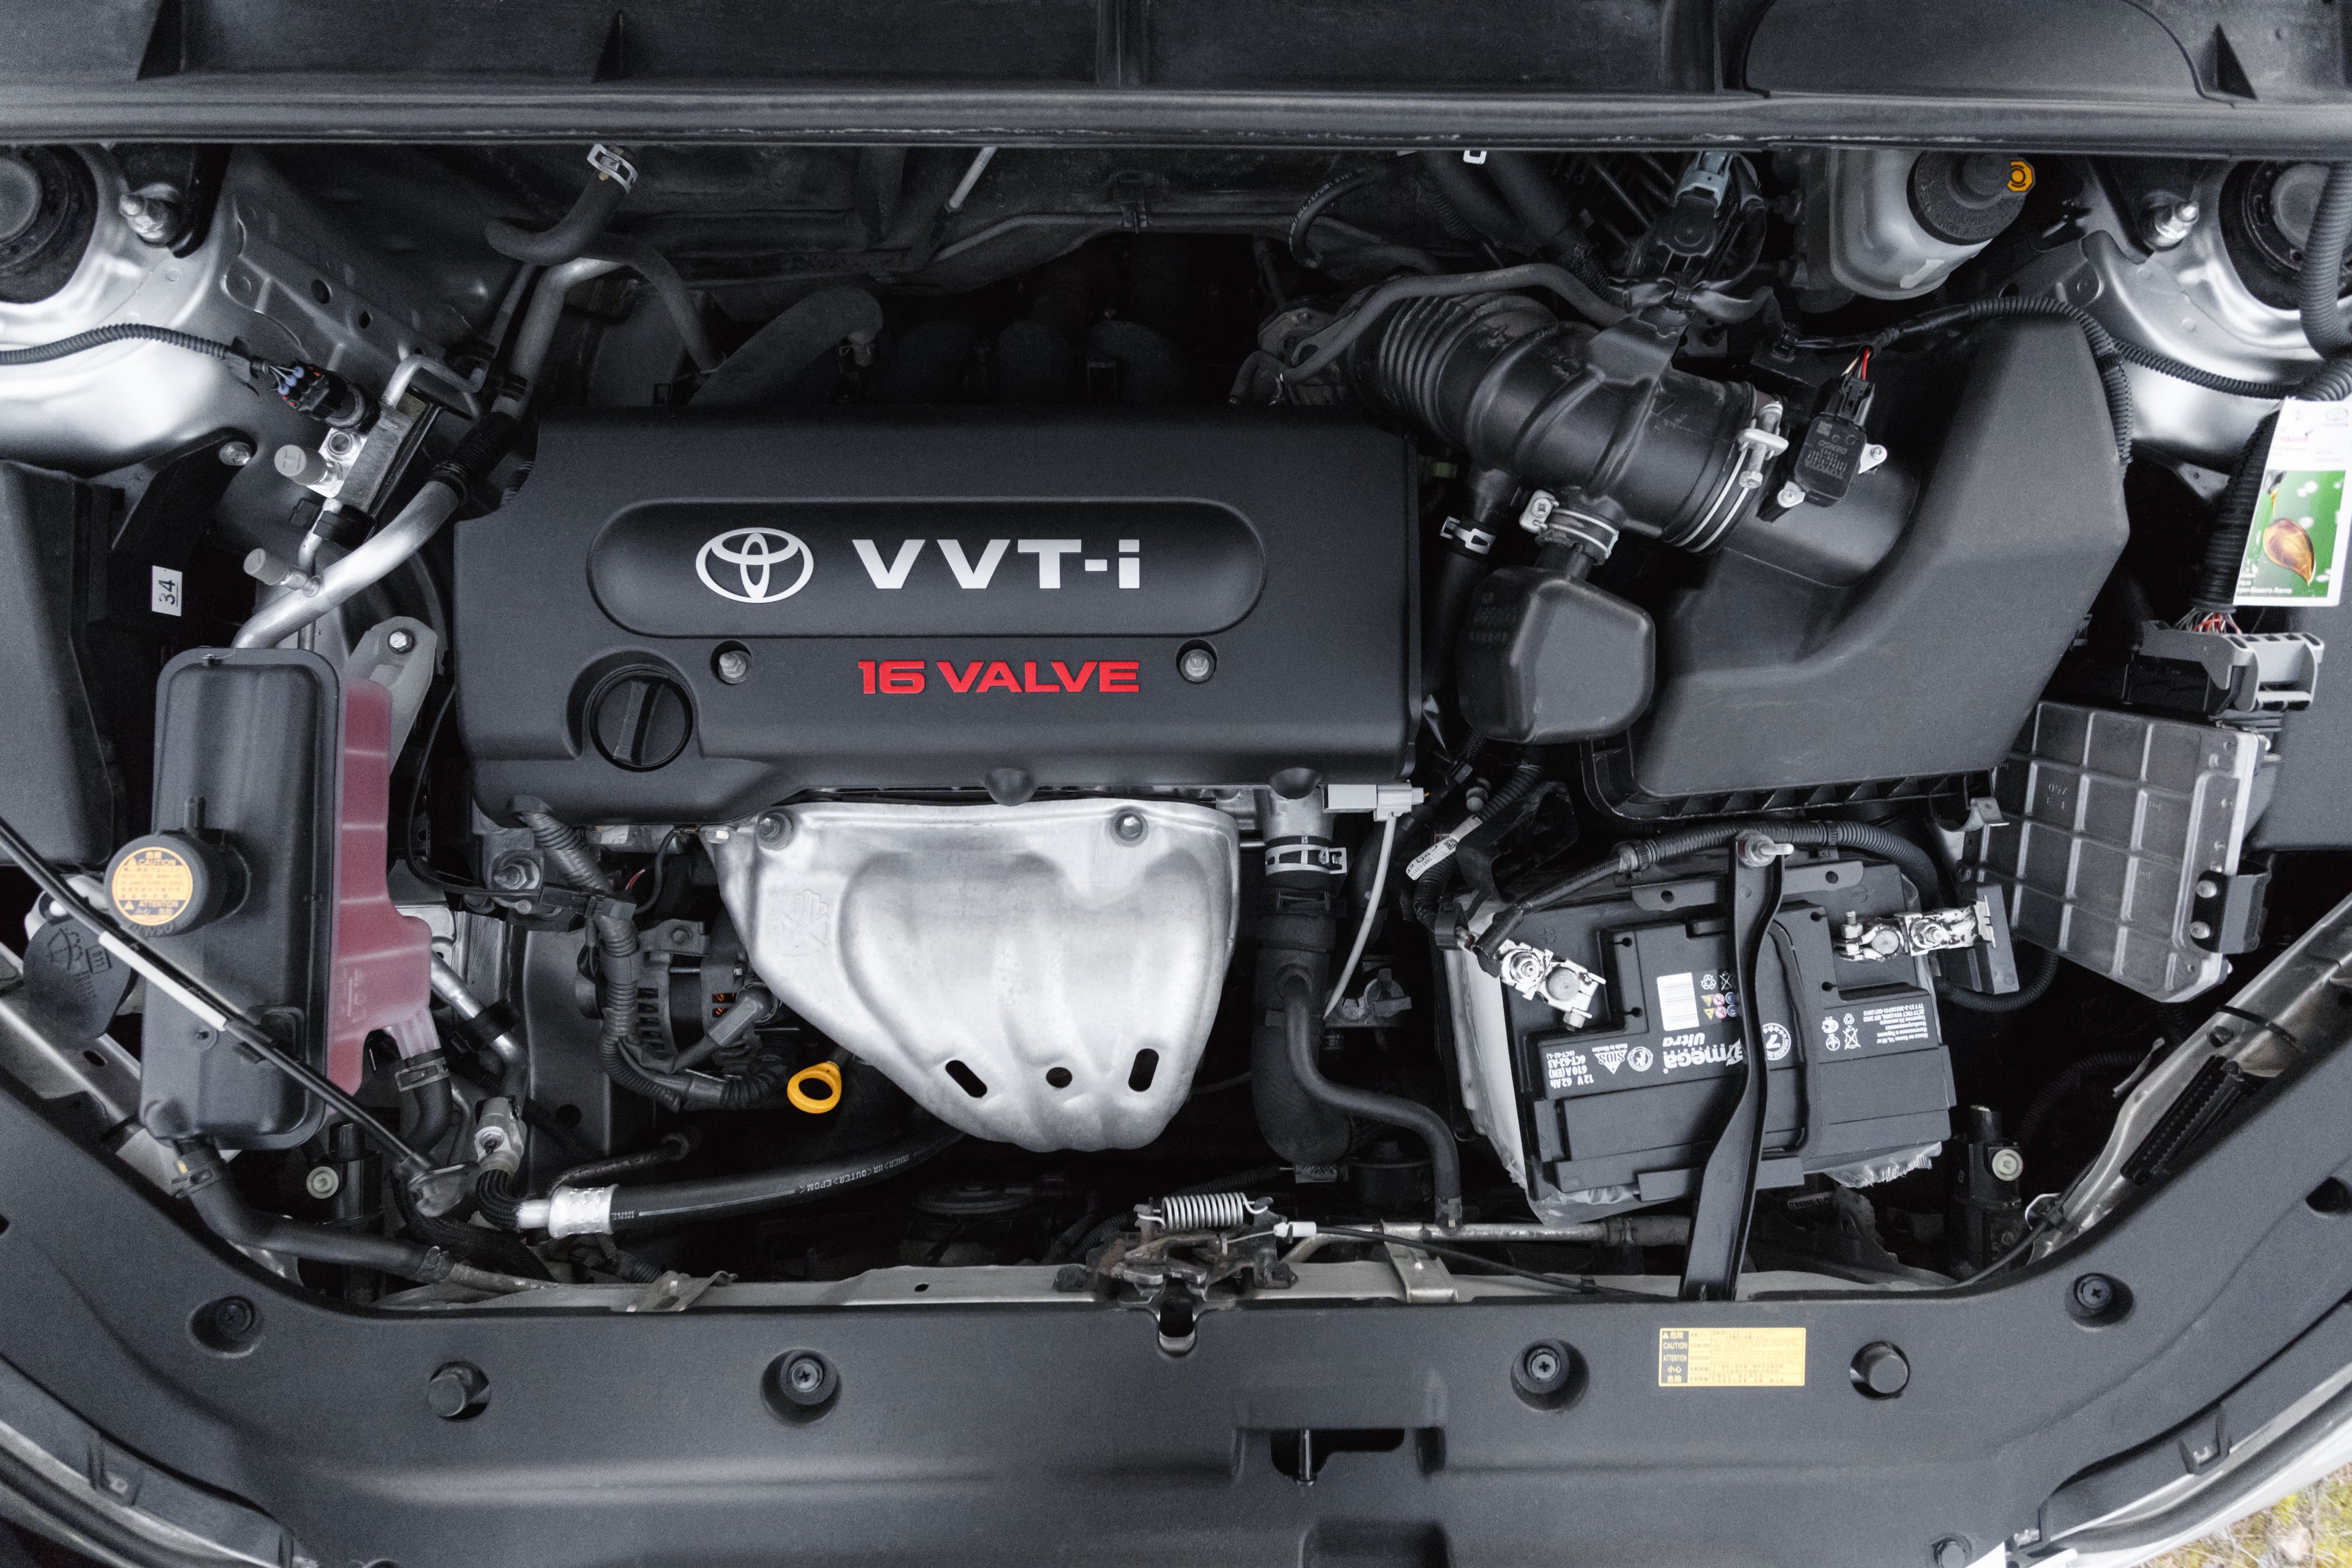 Engine of a Toyota vehicle, which is often highly durable and recommended by mechanics